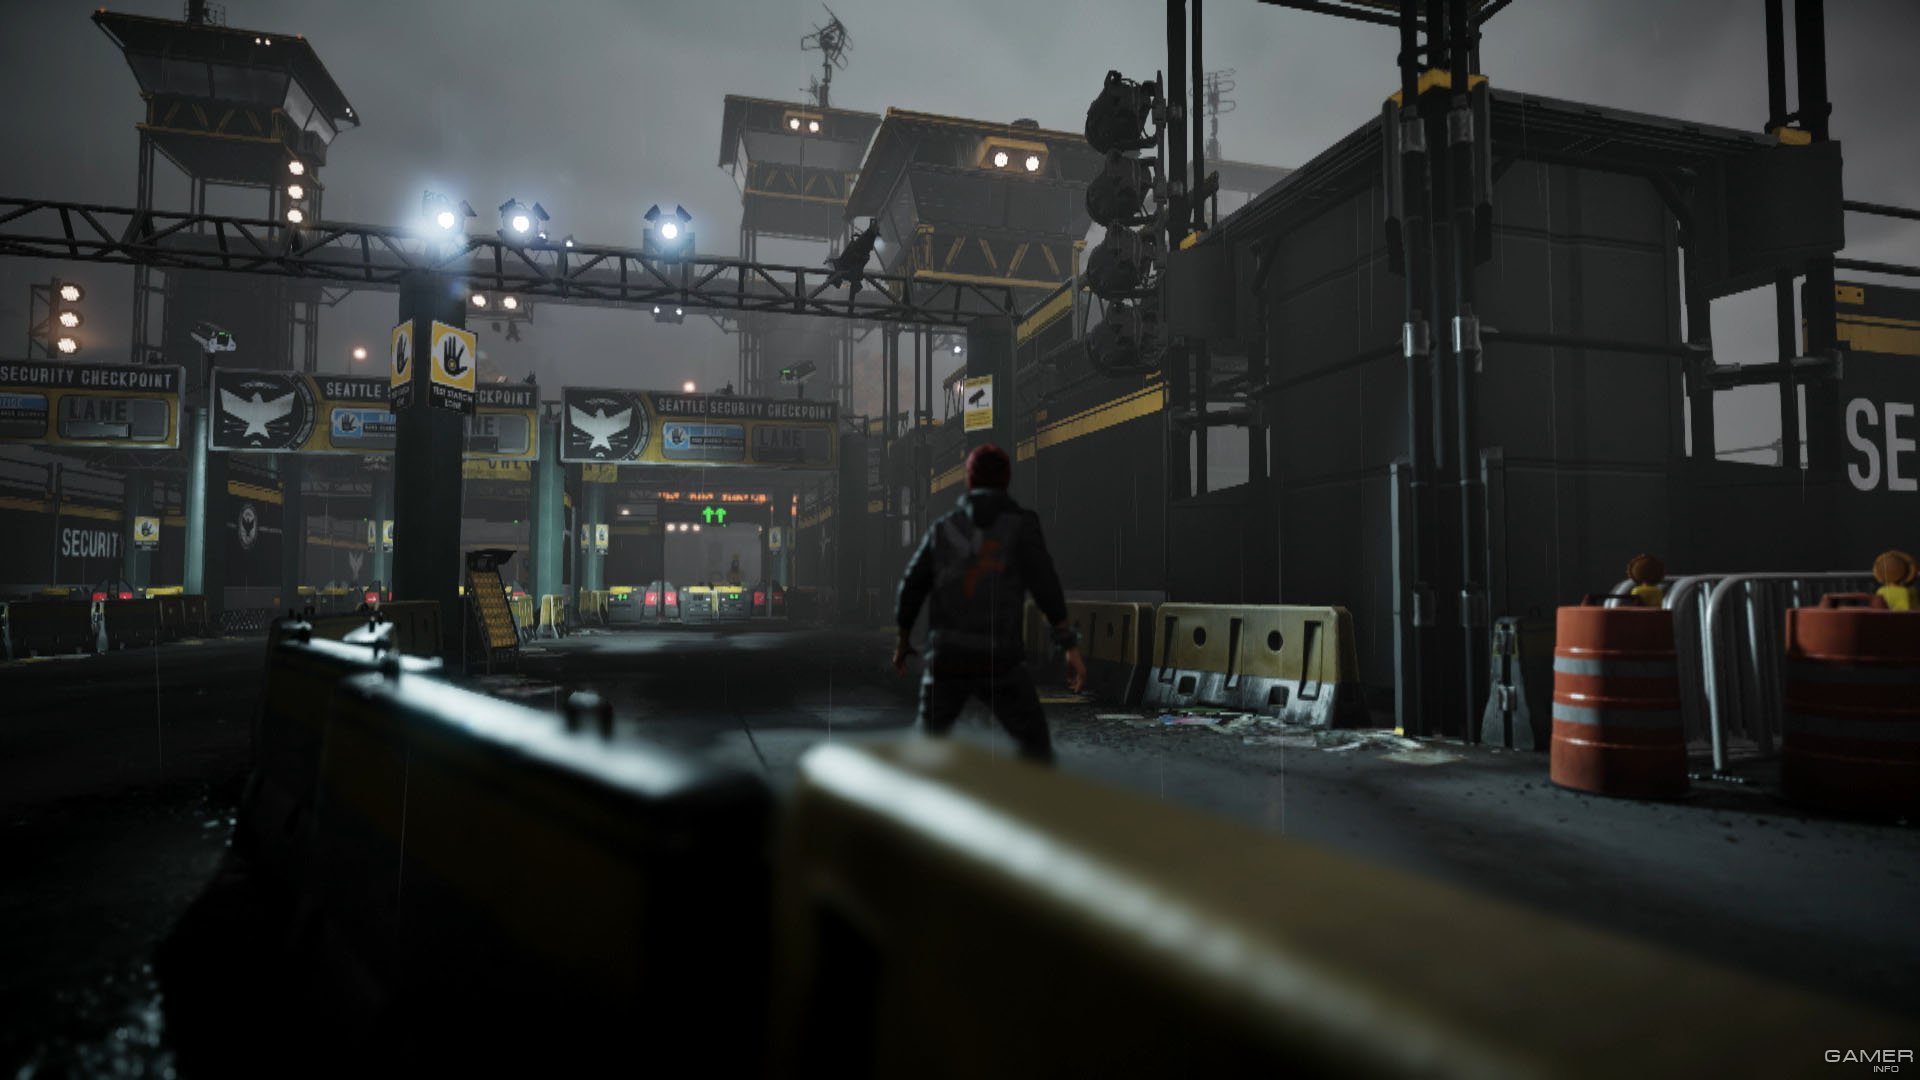 New son son 2. Infamous second son Скриншоты. Infamous second son Xbox 360. Игры Xbox 360 второй сын. Infamous second son screenshots.